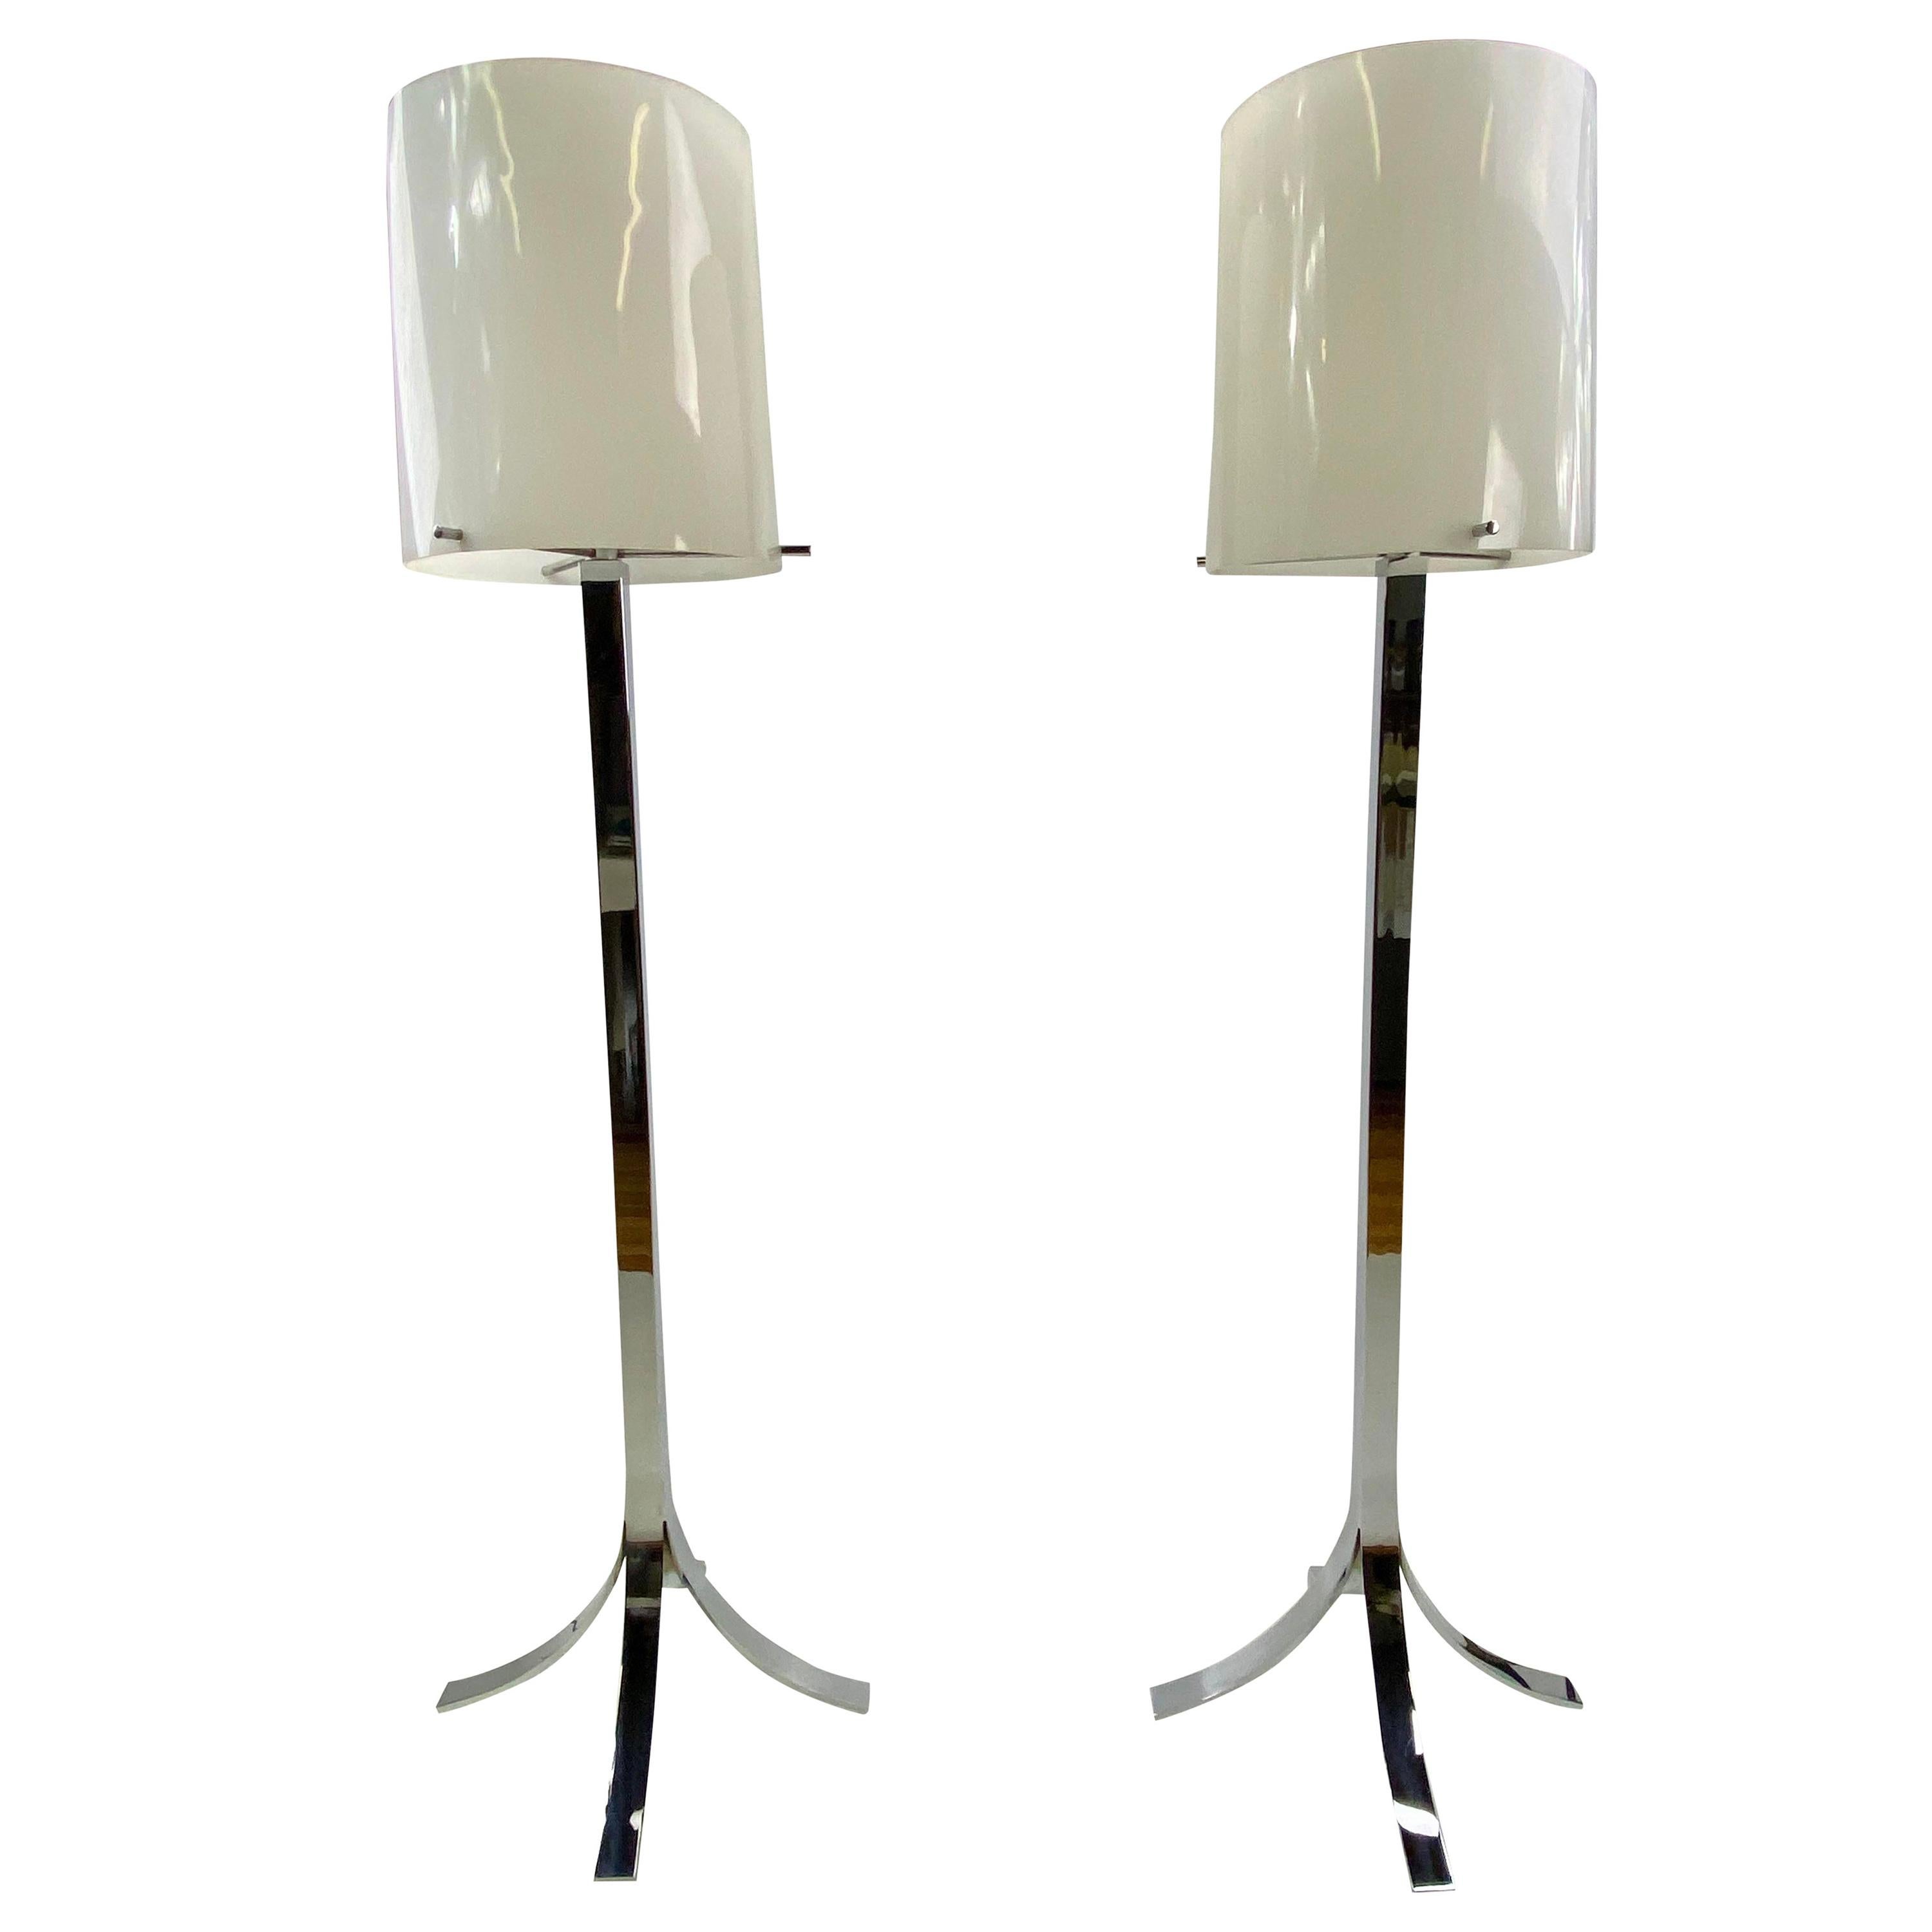 Mid-Century Modern Stainless Chrome Floor Lamps, a Pair For Sale